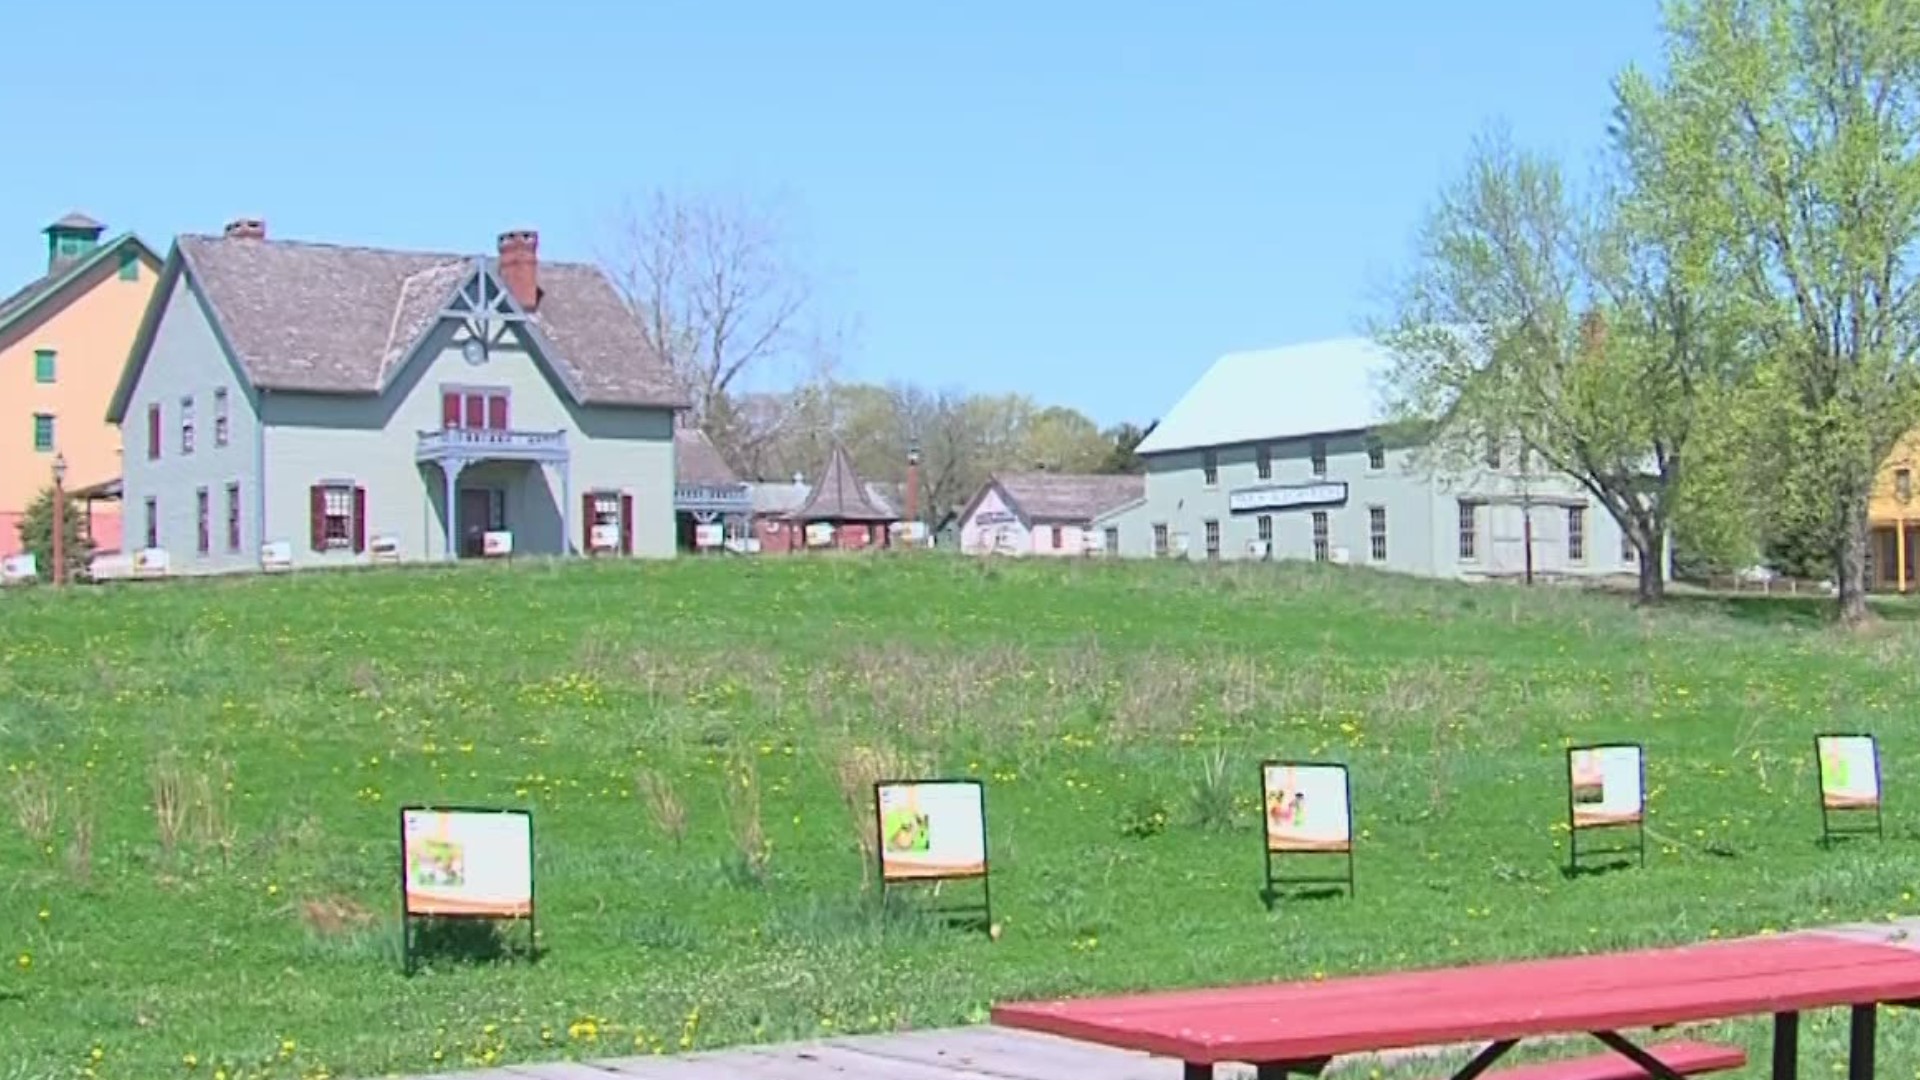 The historic spot is set to open back up on May 1 with COVID-19 restrictions in place, including faces masks when inside buildings or on a tractor cart.